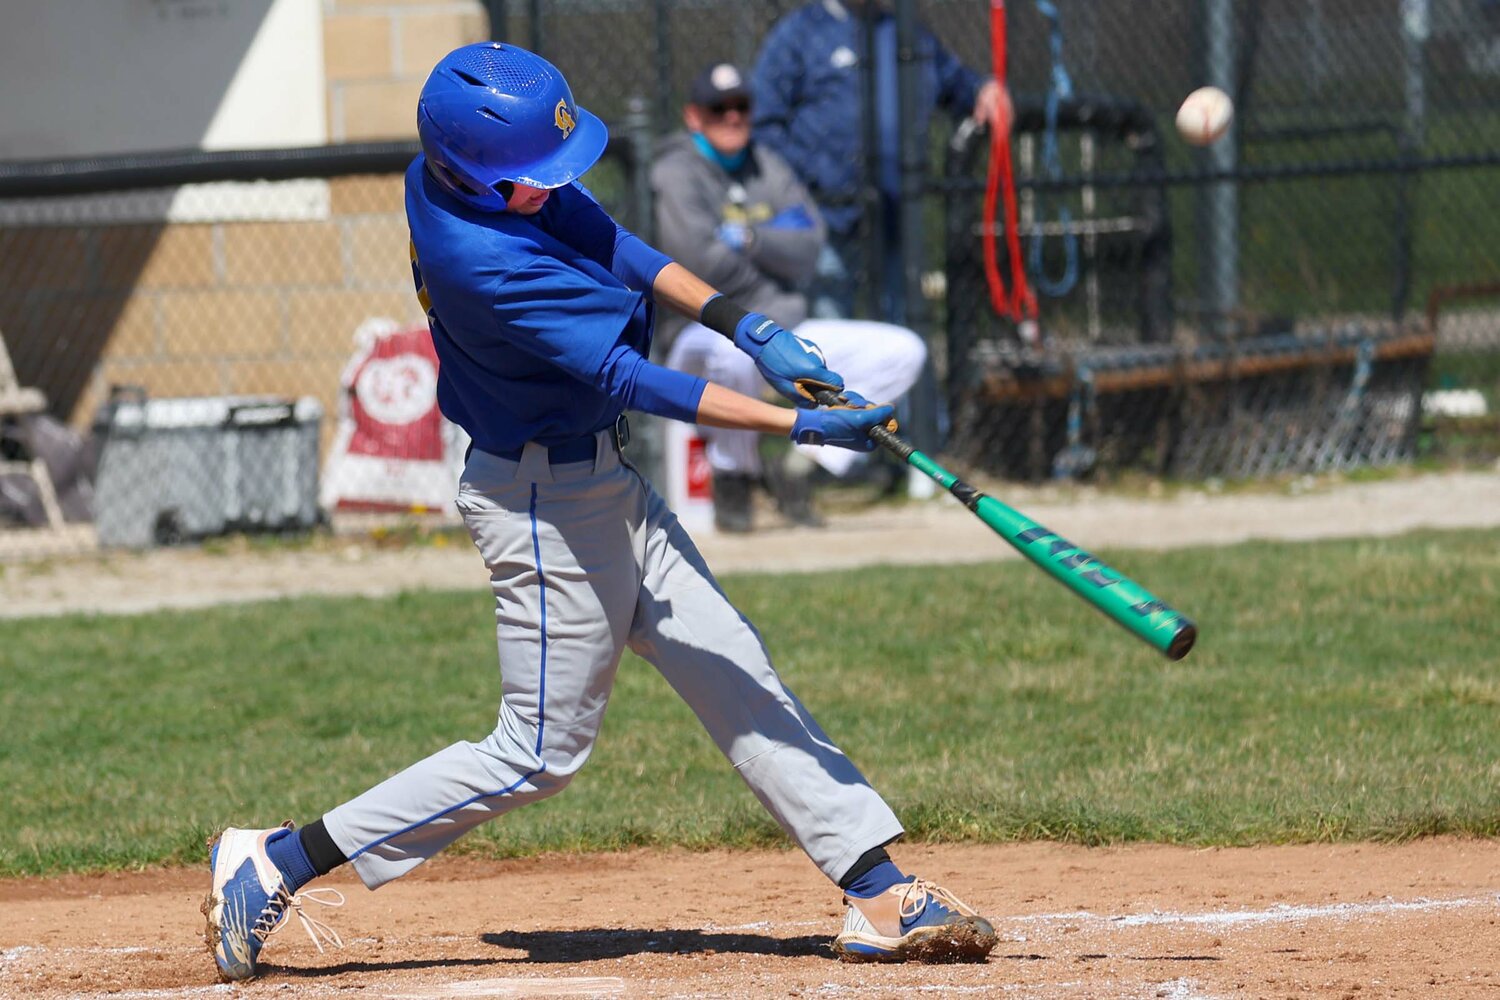 Henry Bannon of Crawfordsville - single to center field